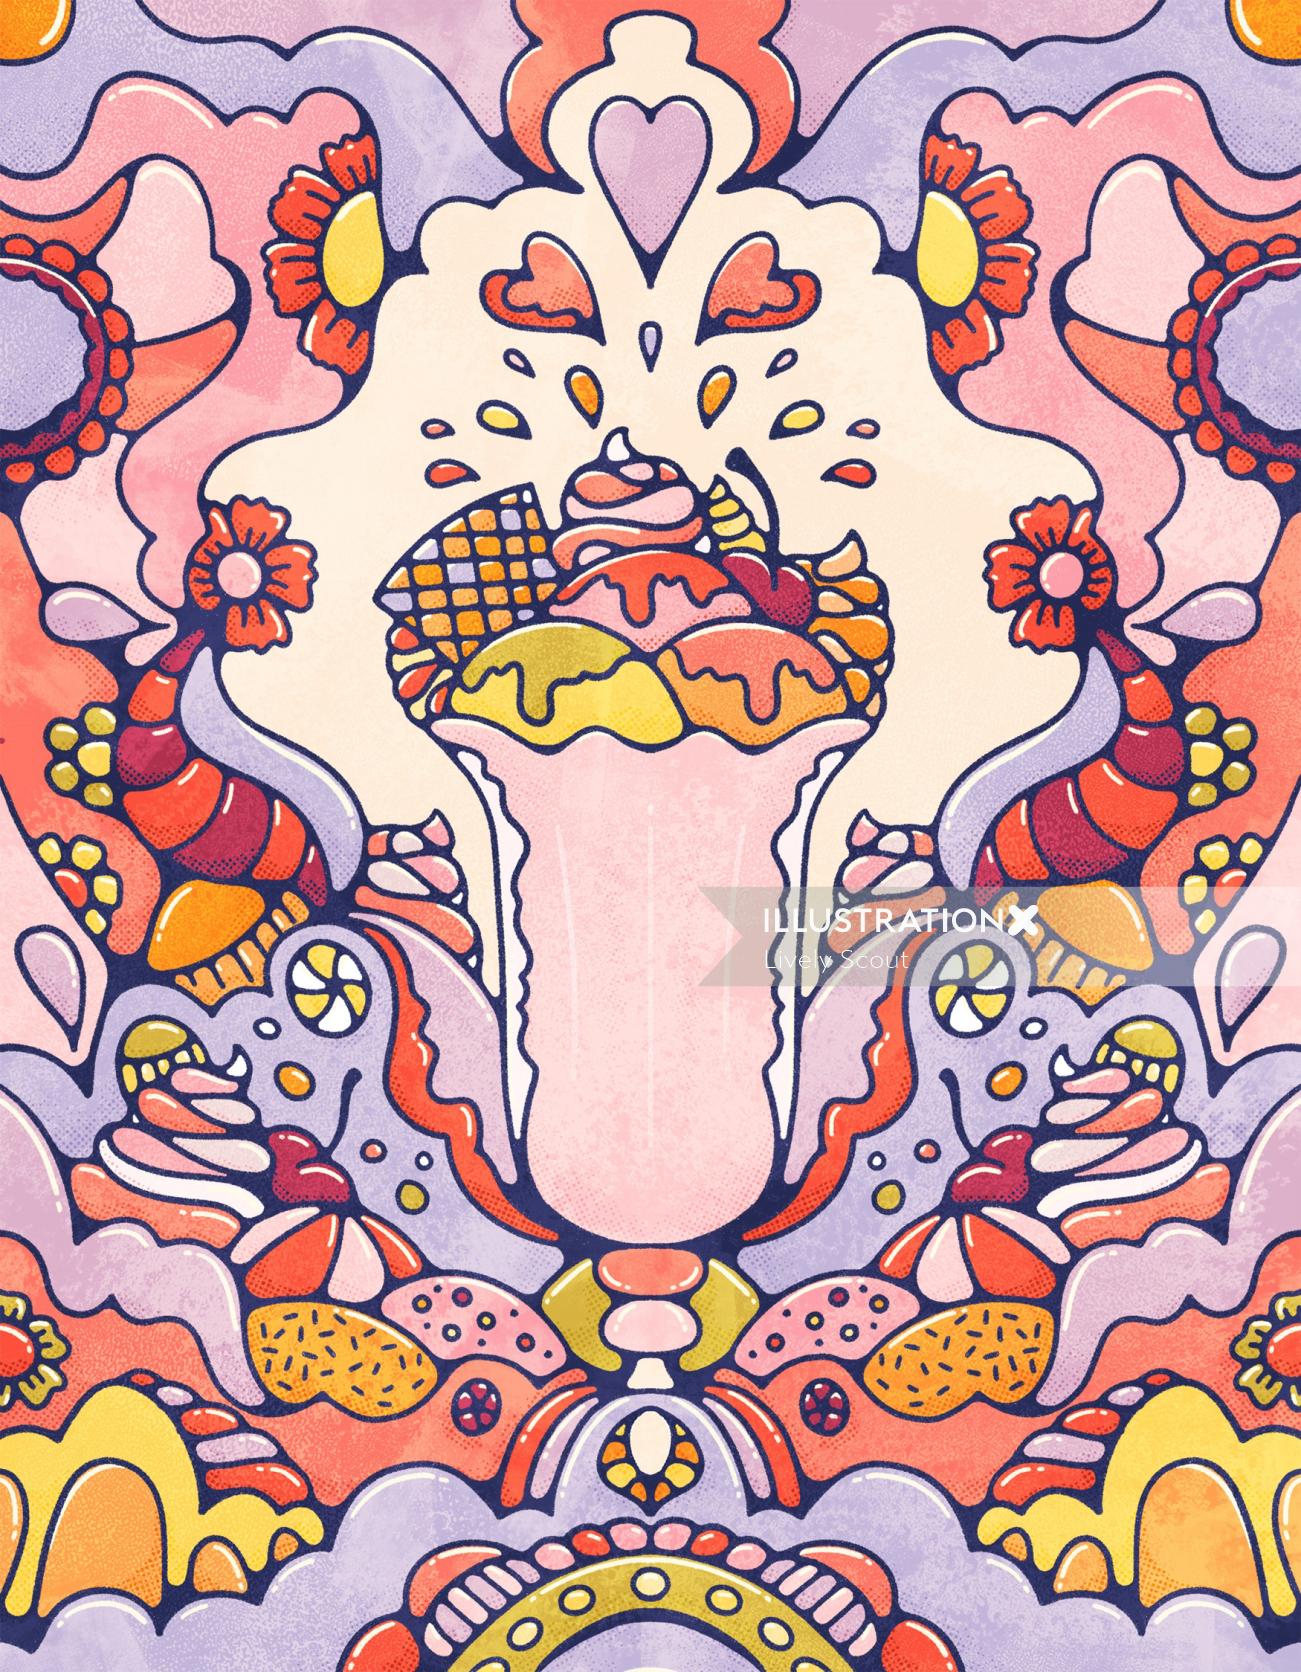 Delicious ice-cream sundae surrounded by eye watering candy and psychedelic patterns